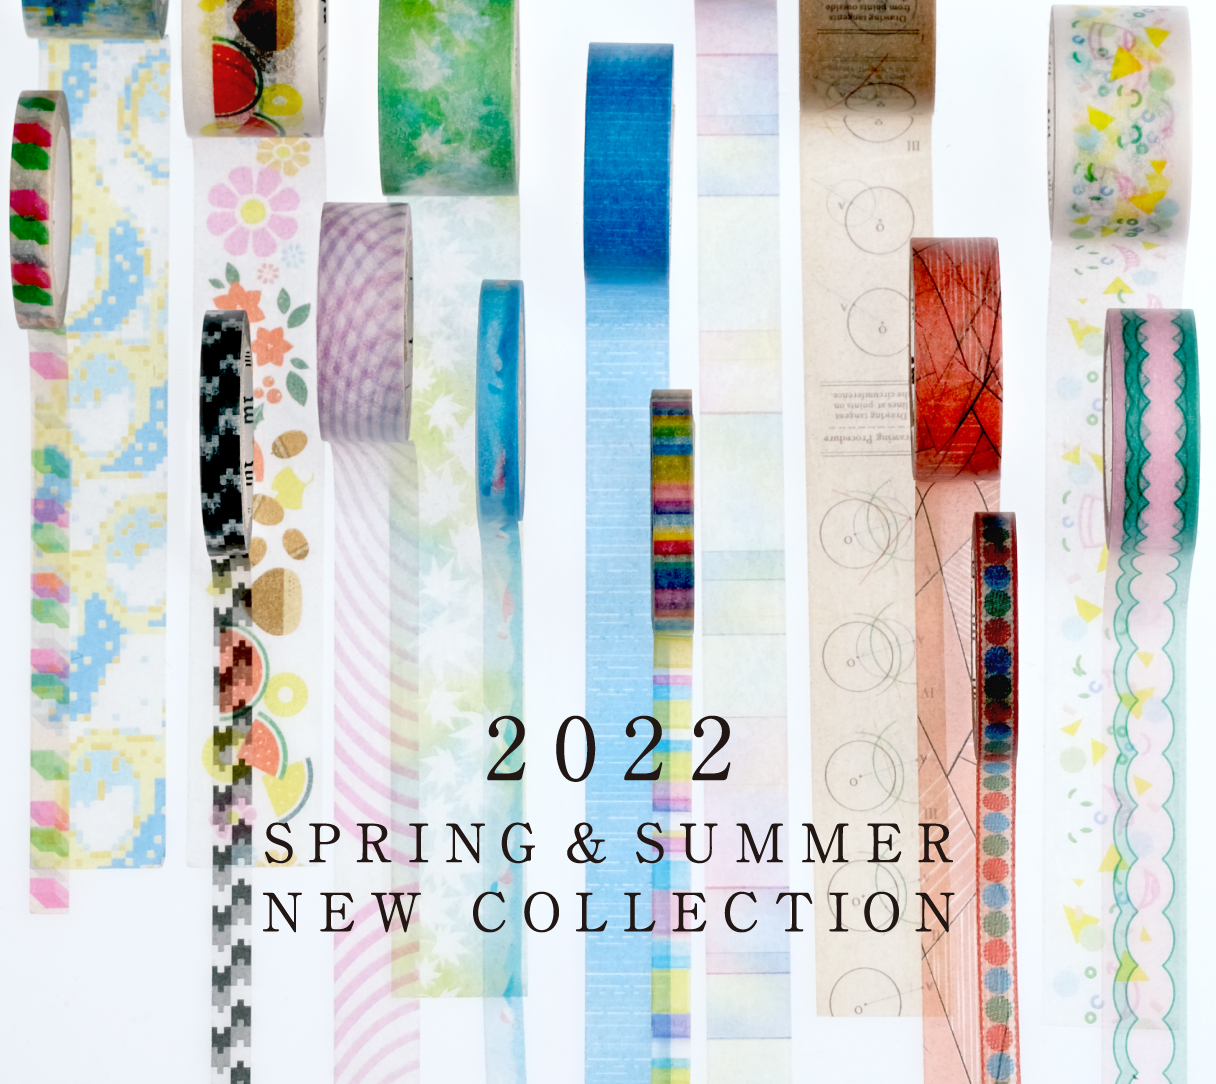 2022 SPRING&SUMMER NEW COLLECTION